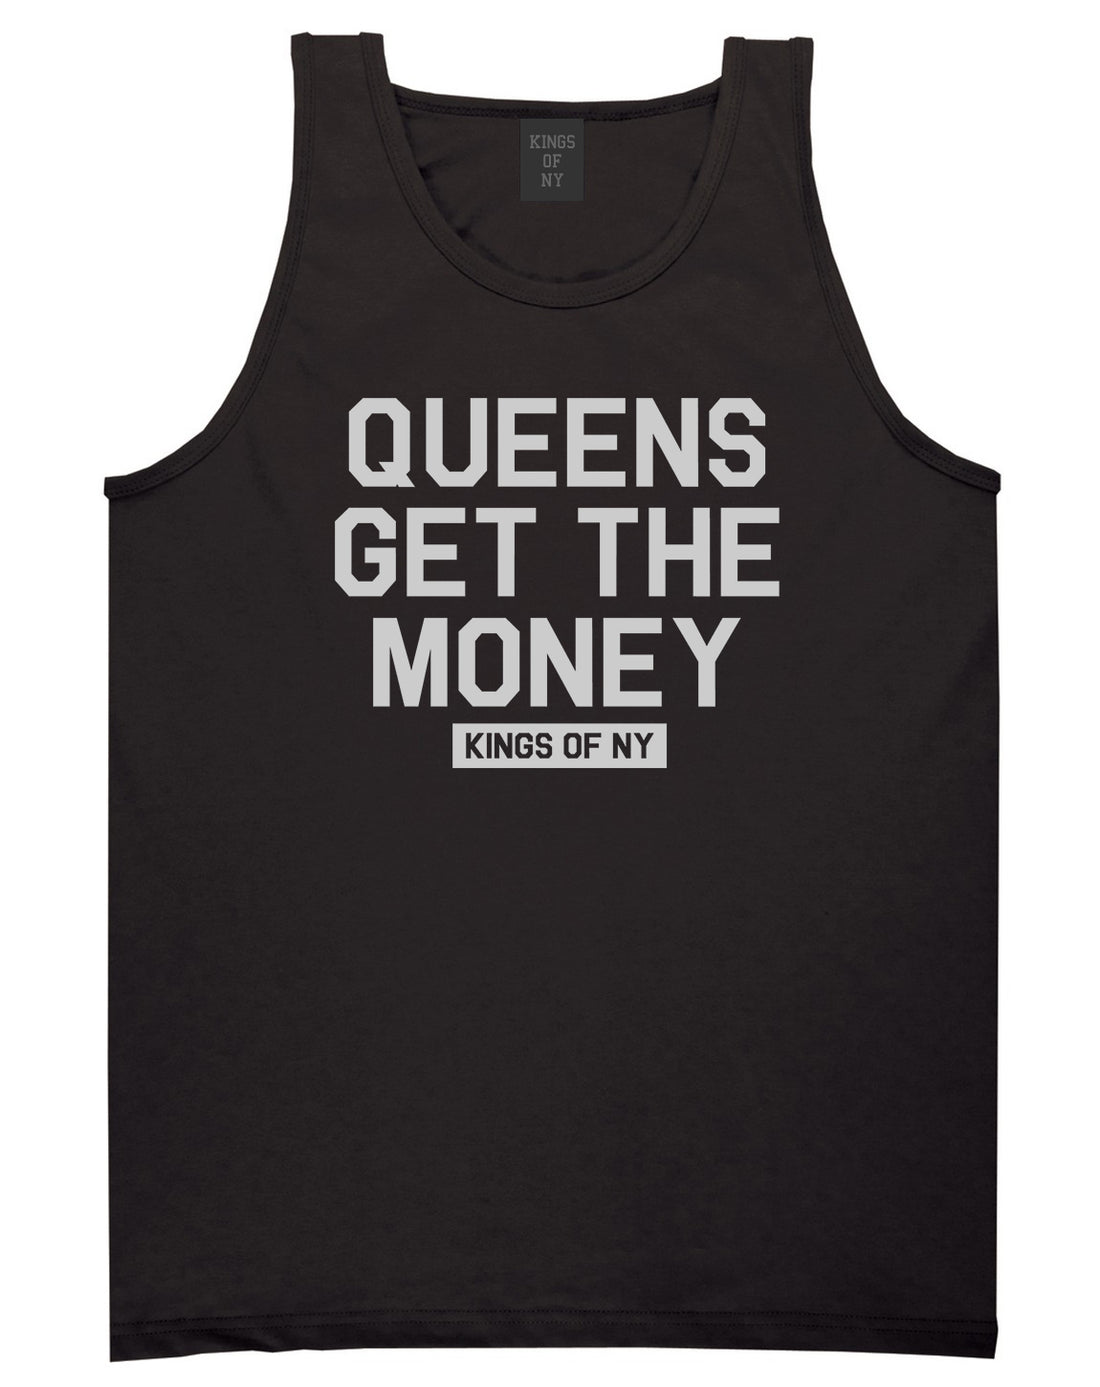 Queens Get The Money Mens Tank Top Shirt Black by Kings Of NY